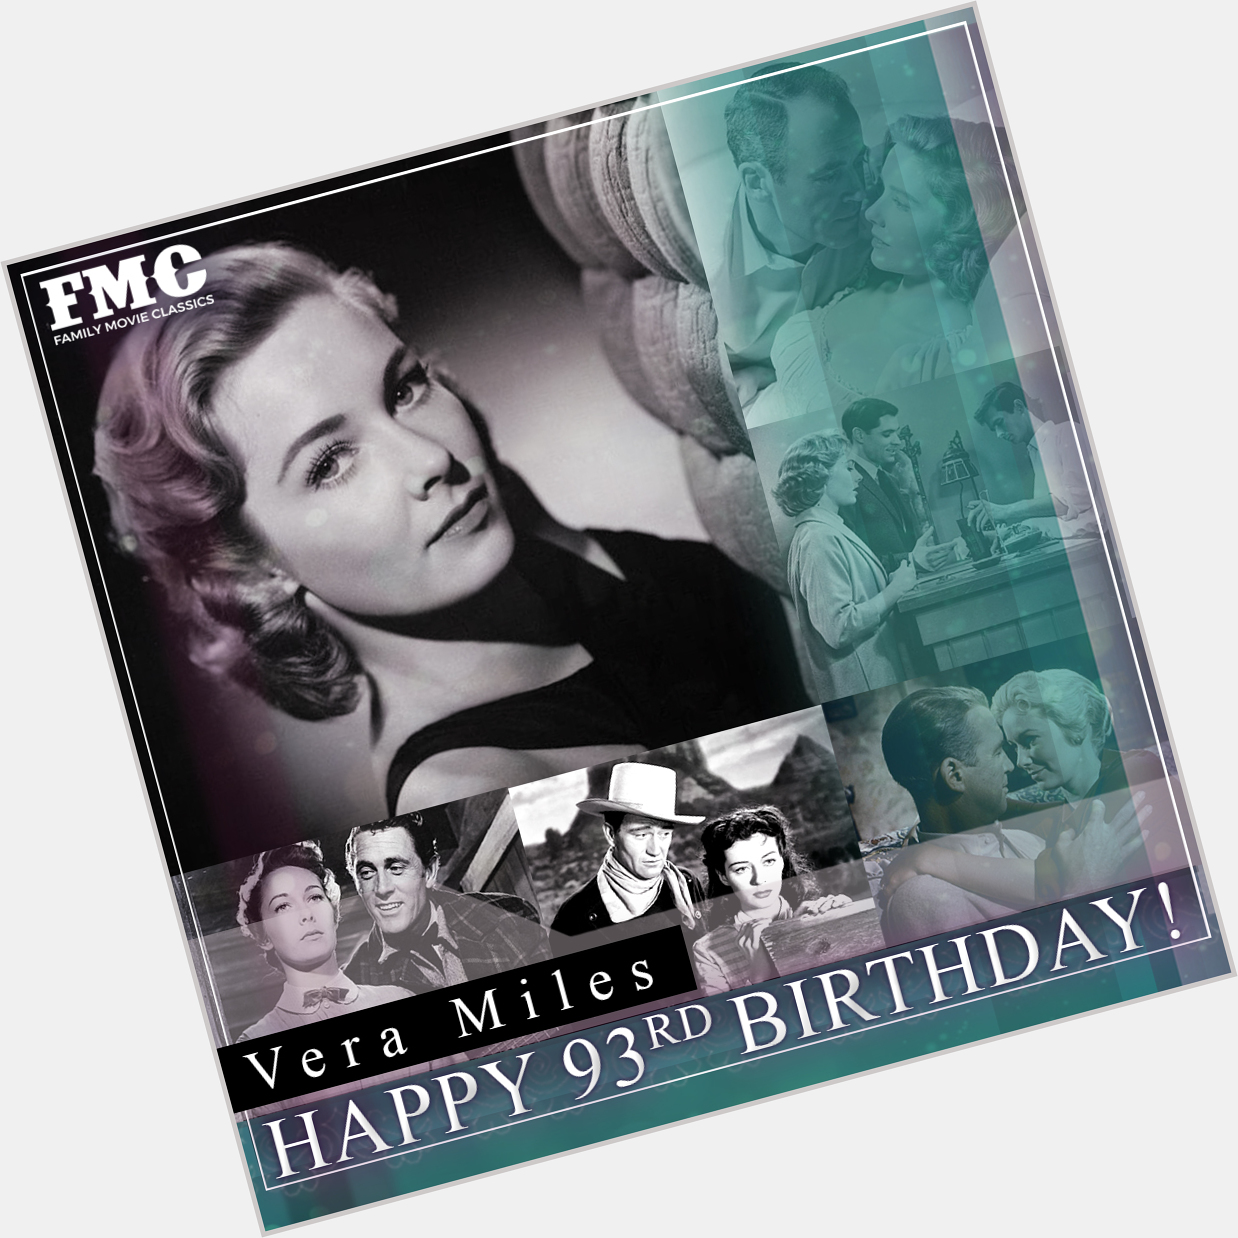  Happy 93rd Birthday to Vera Miles! See her in AUTUMN LEAVES (\56) tonight at 8p ET on FMC. 